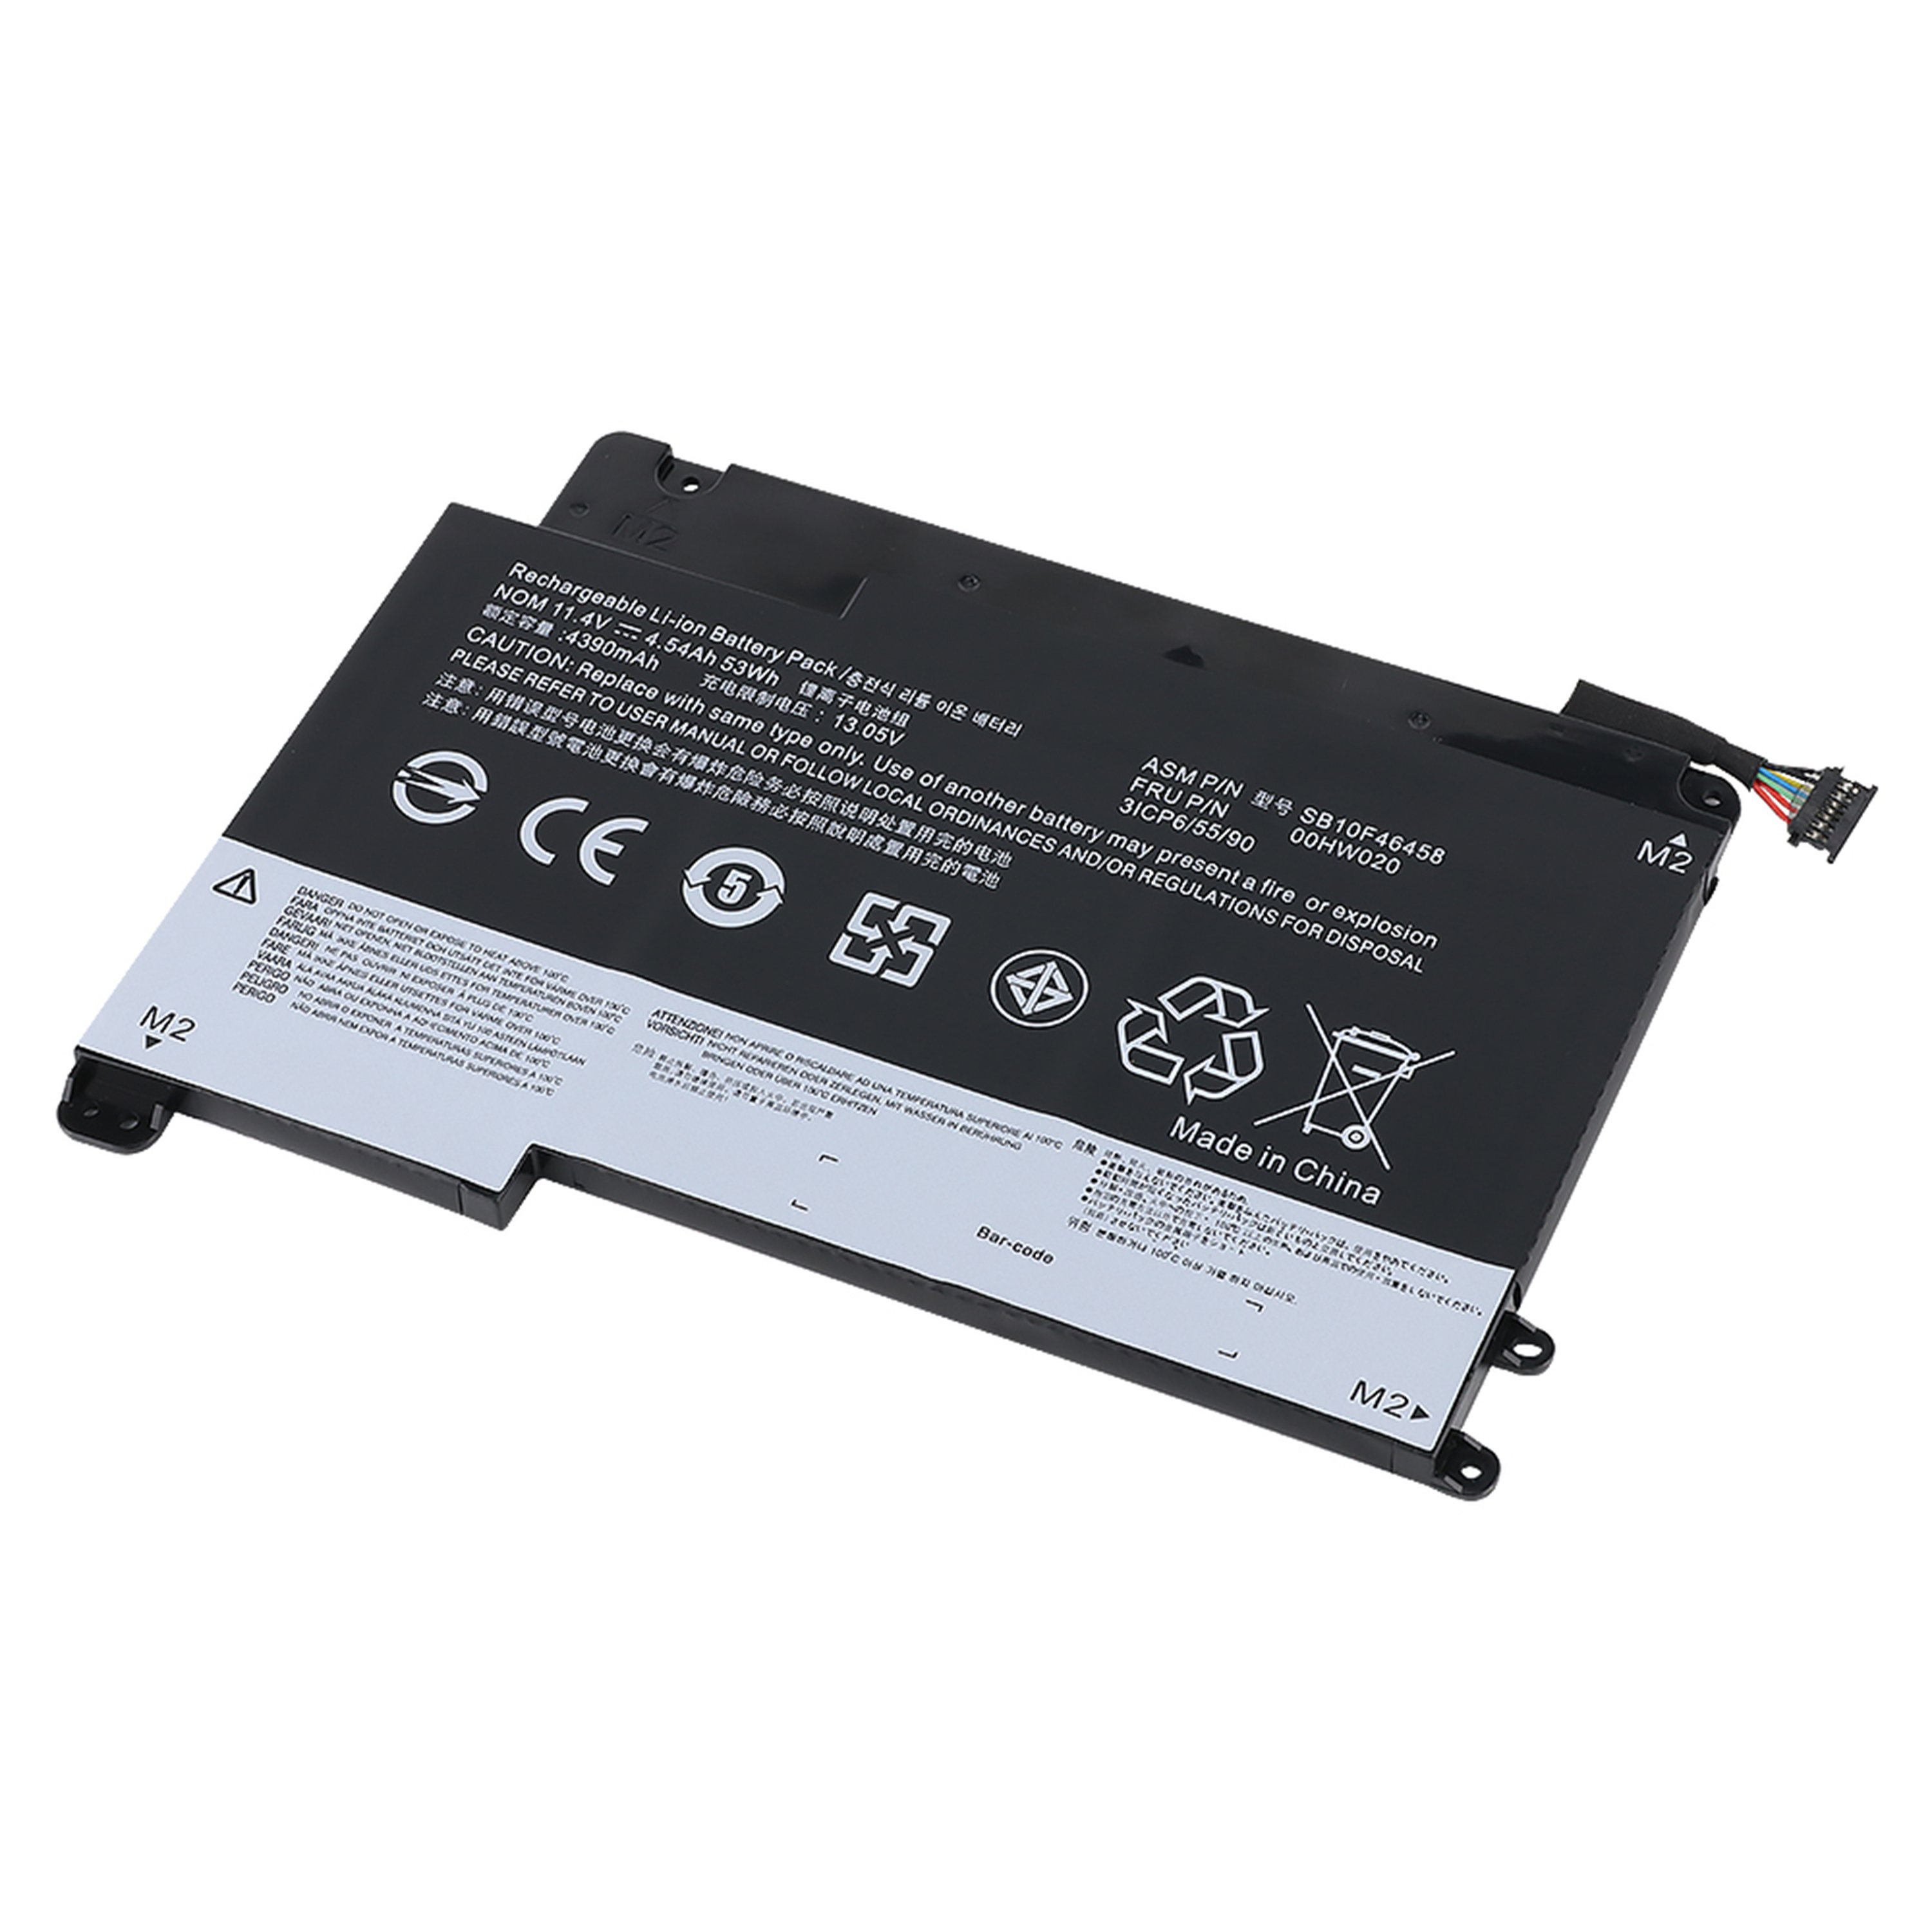 00HW020 rechargeable lithium ion Notebook battery Laptop battery LENOVO ThinkPad Yoga 460 20ELS039GE, ThinkPad Yoga 460 20EM, ThinkPad Yoga 460 20FY, ThinkPad Yoga 460 20G,